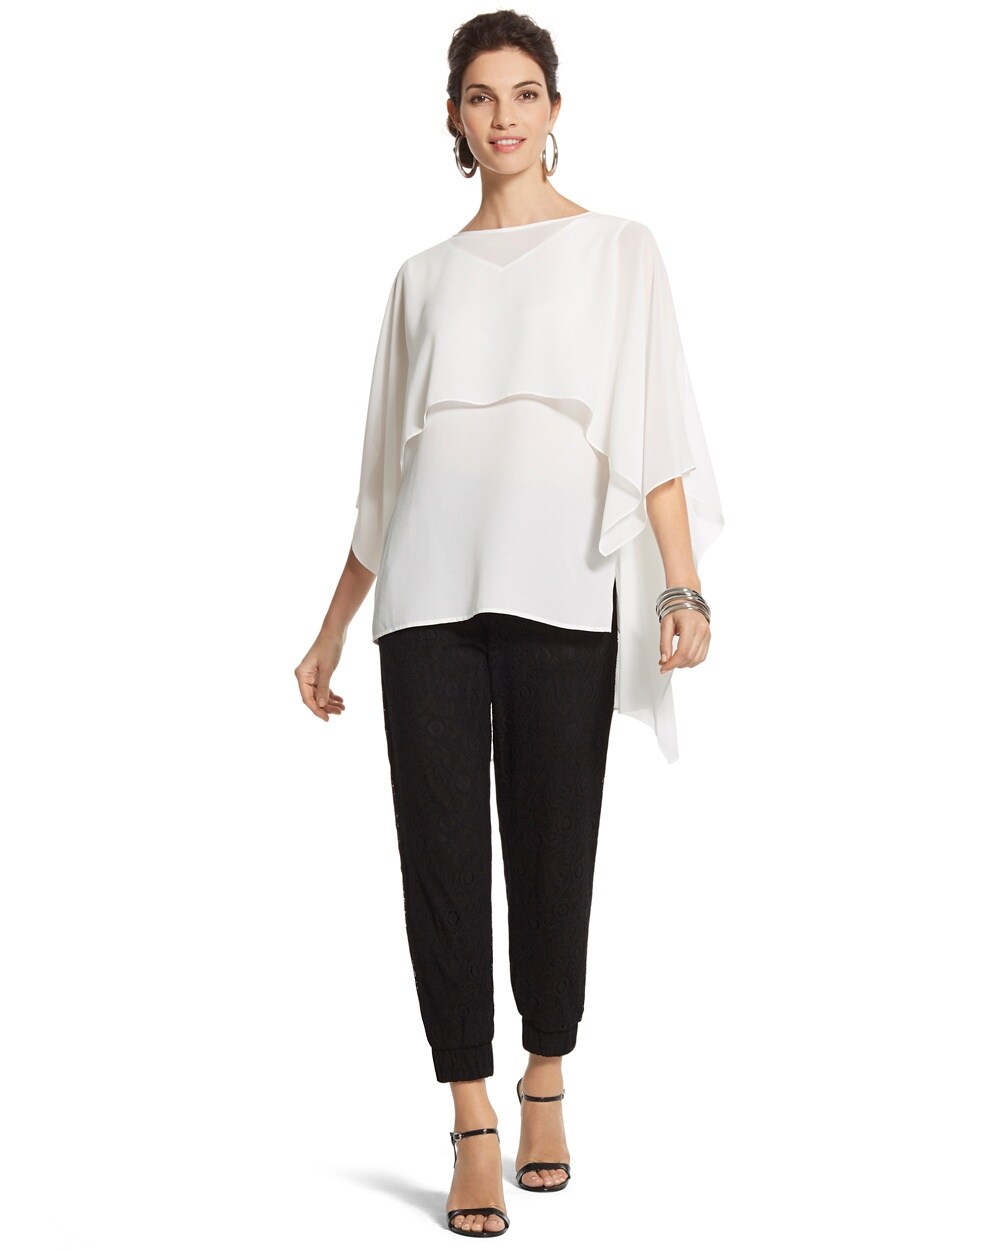 Black Label Flowy Layered Top - Black Label Collection - Women's ...